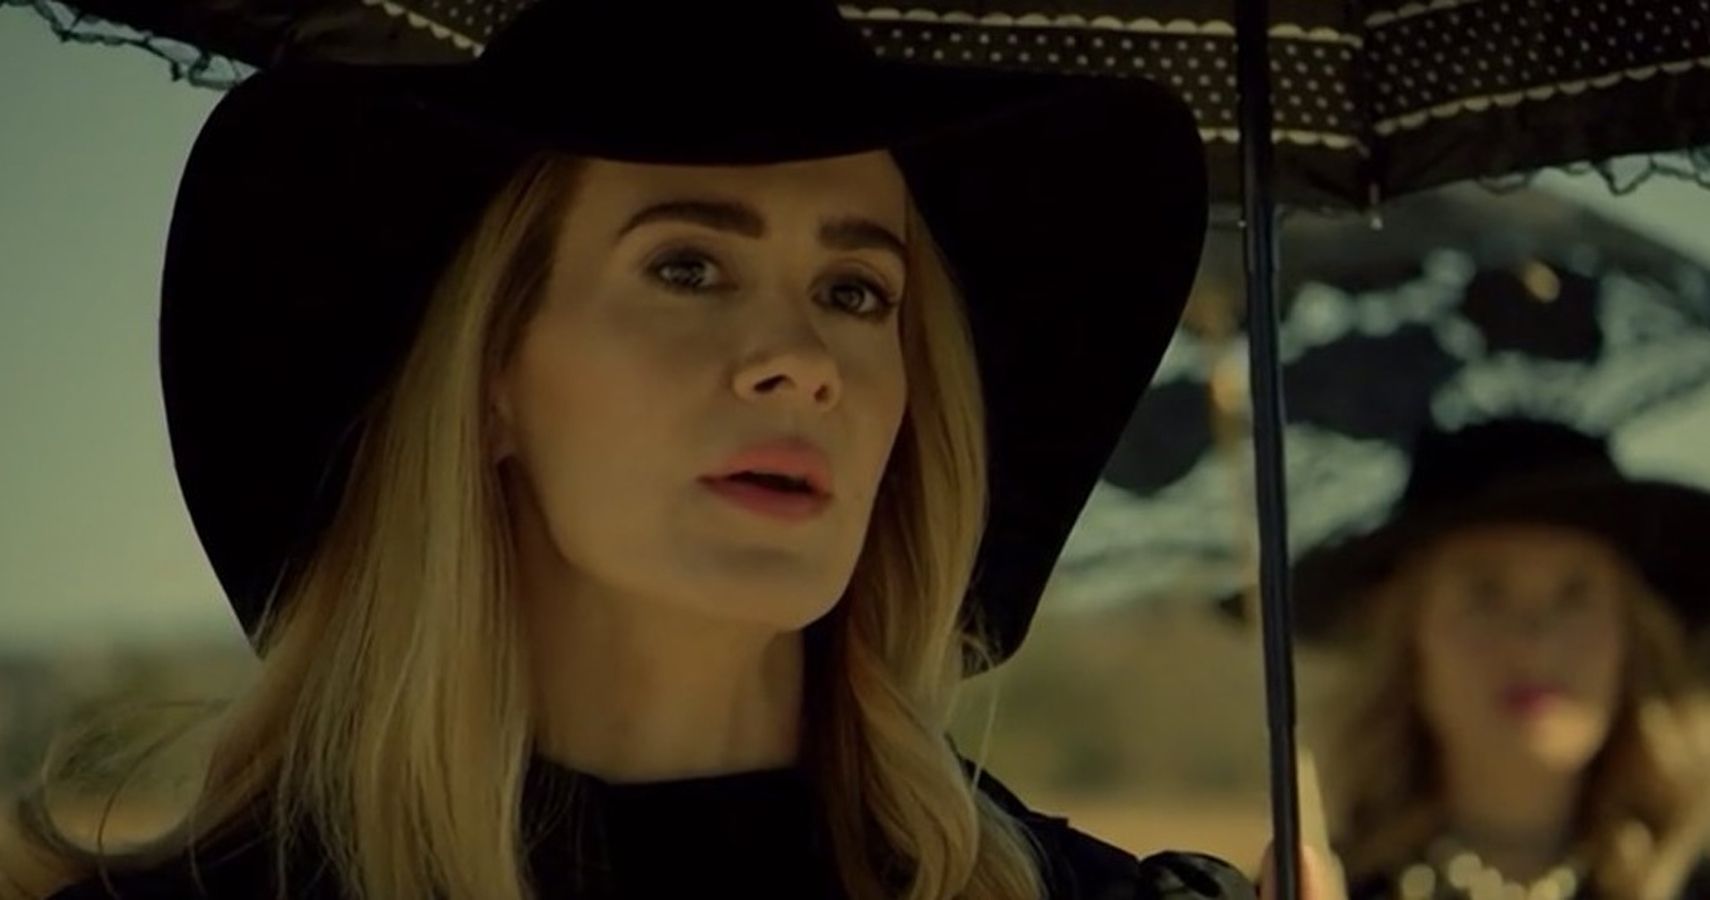 10 Hidden Details You Missed In American Horror Story Coven Episode 1